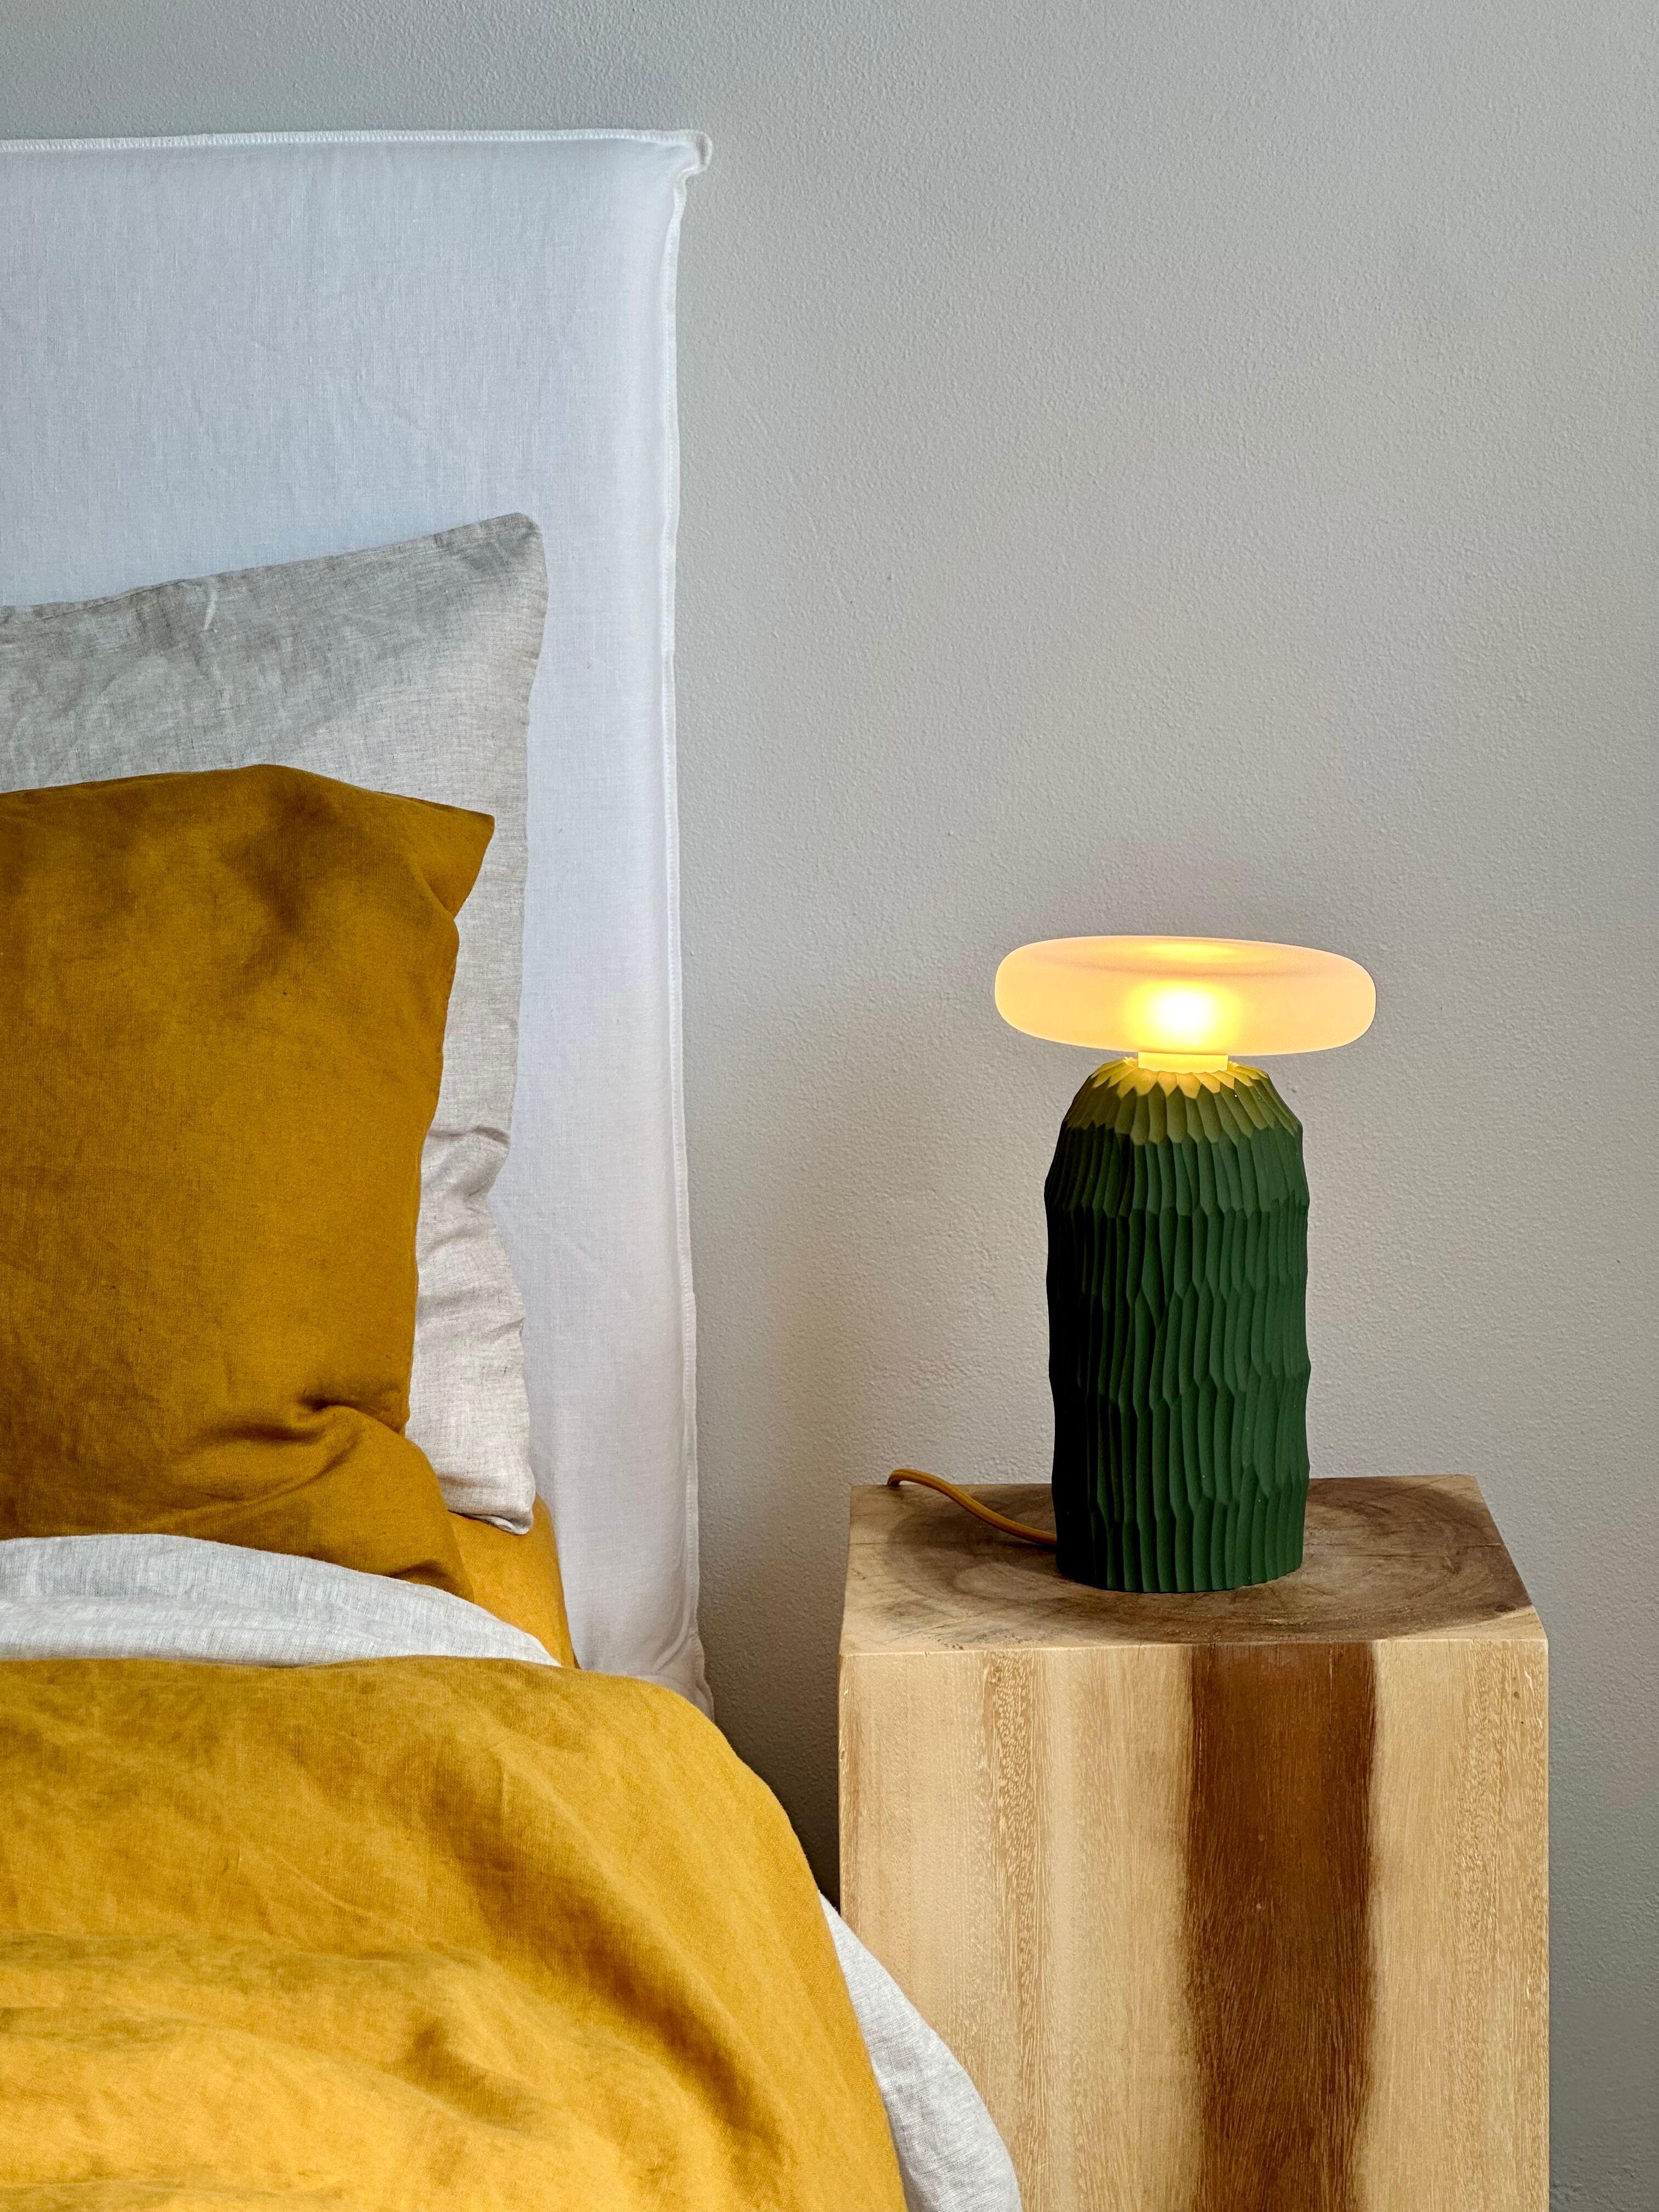 The lamp is a simple and minimalist hand formed ceramic table lamp without a lampshade. Its unique textural base is hand carved in a signature design, with a distinct natural grain from its clay origins. 
It has been designed to create a unique